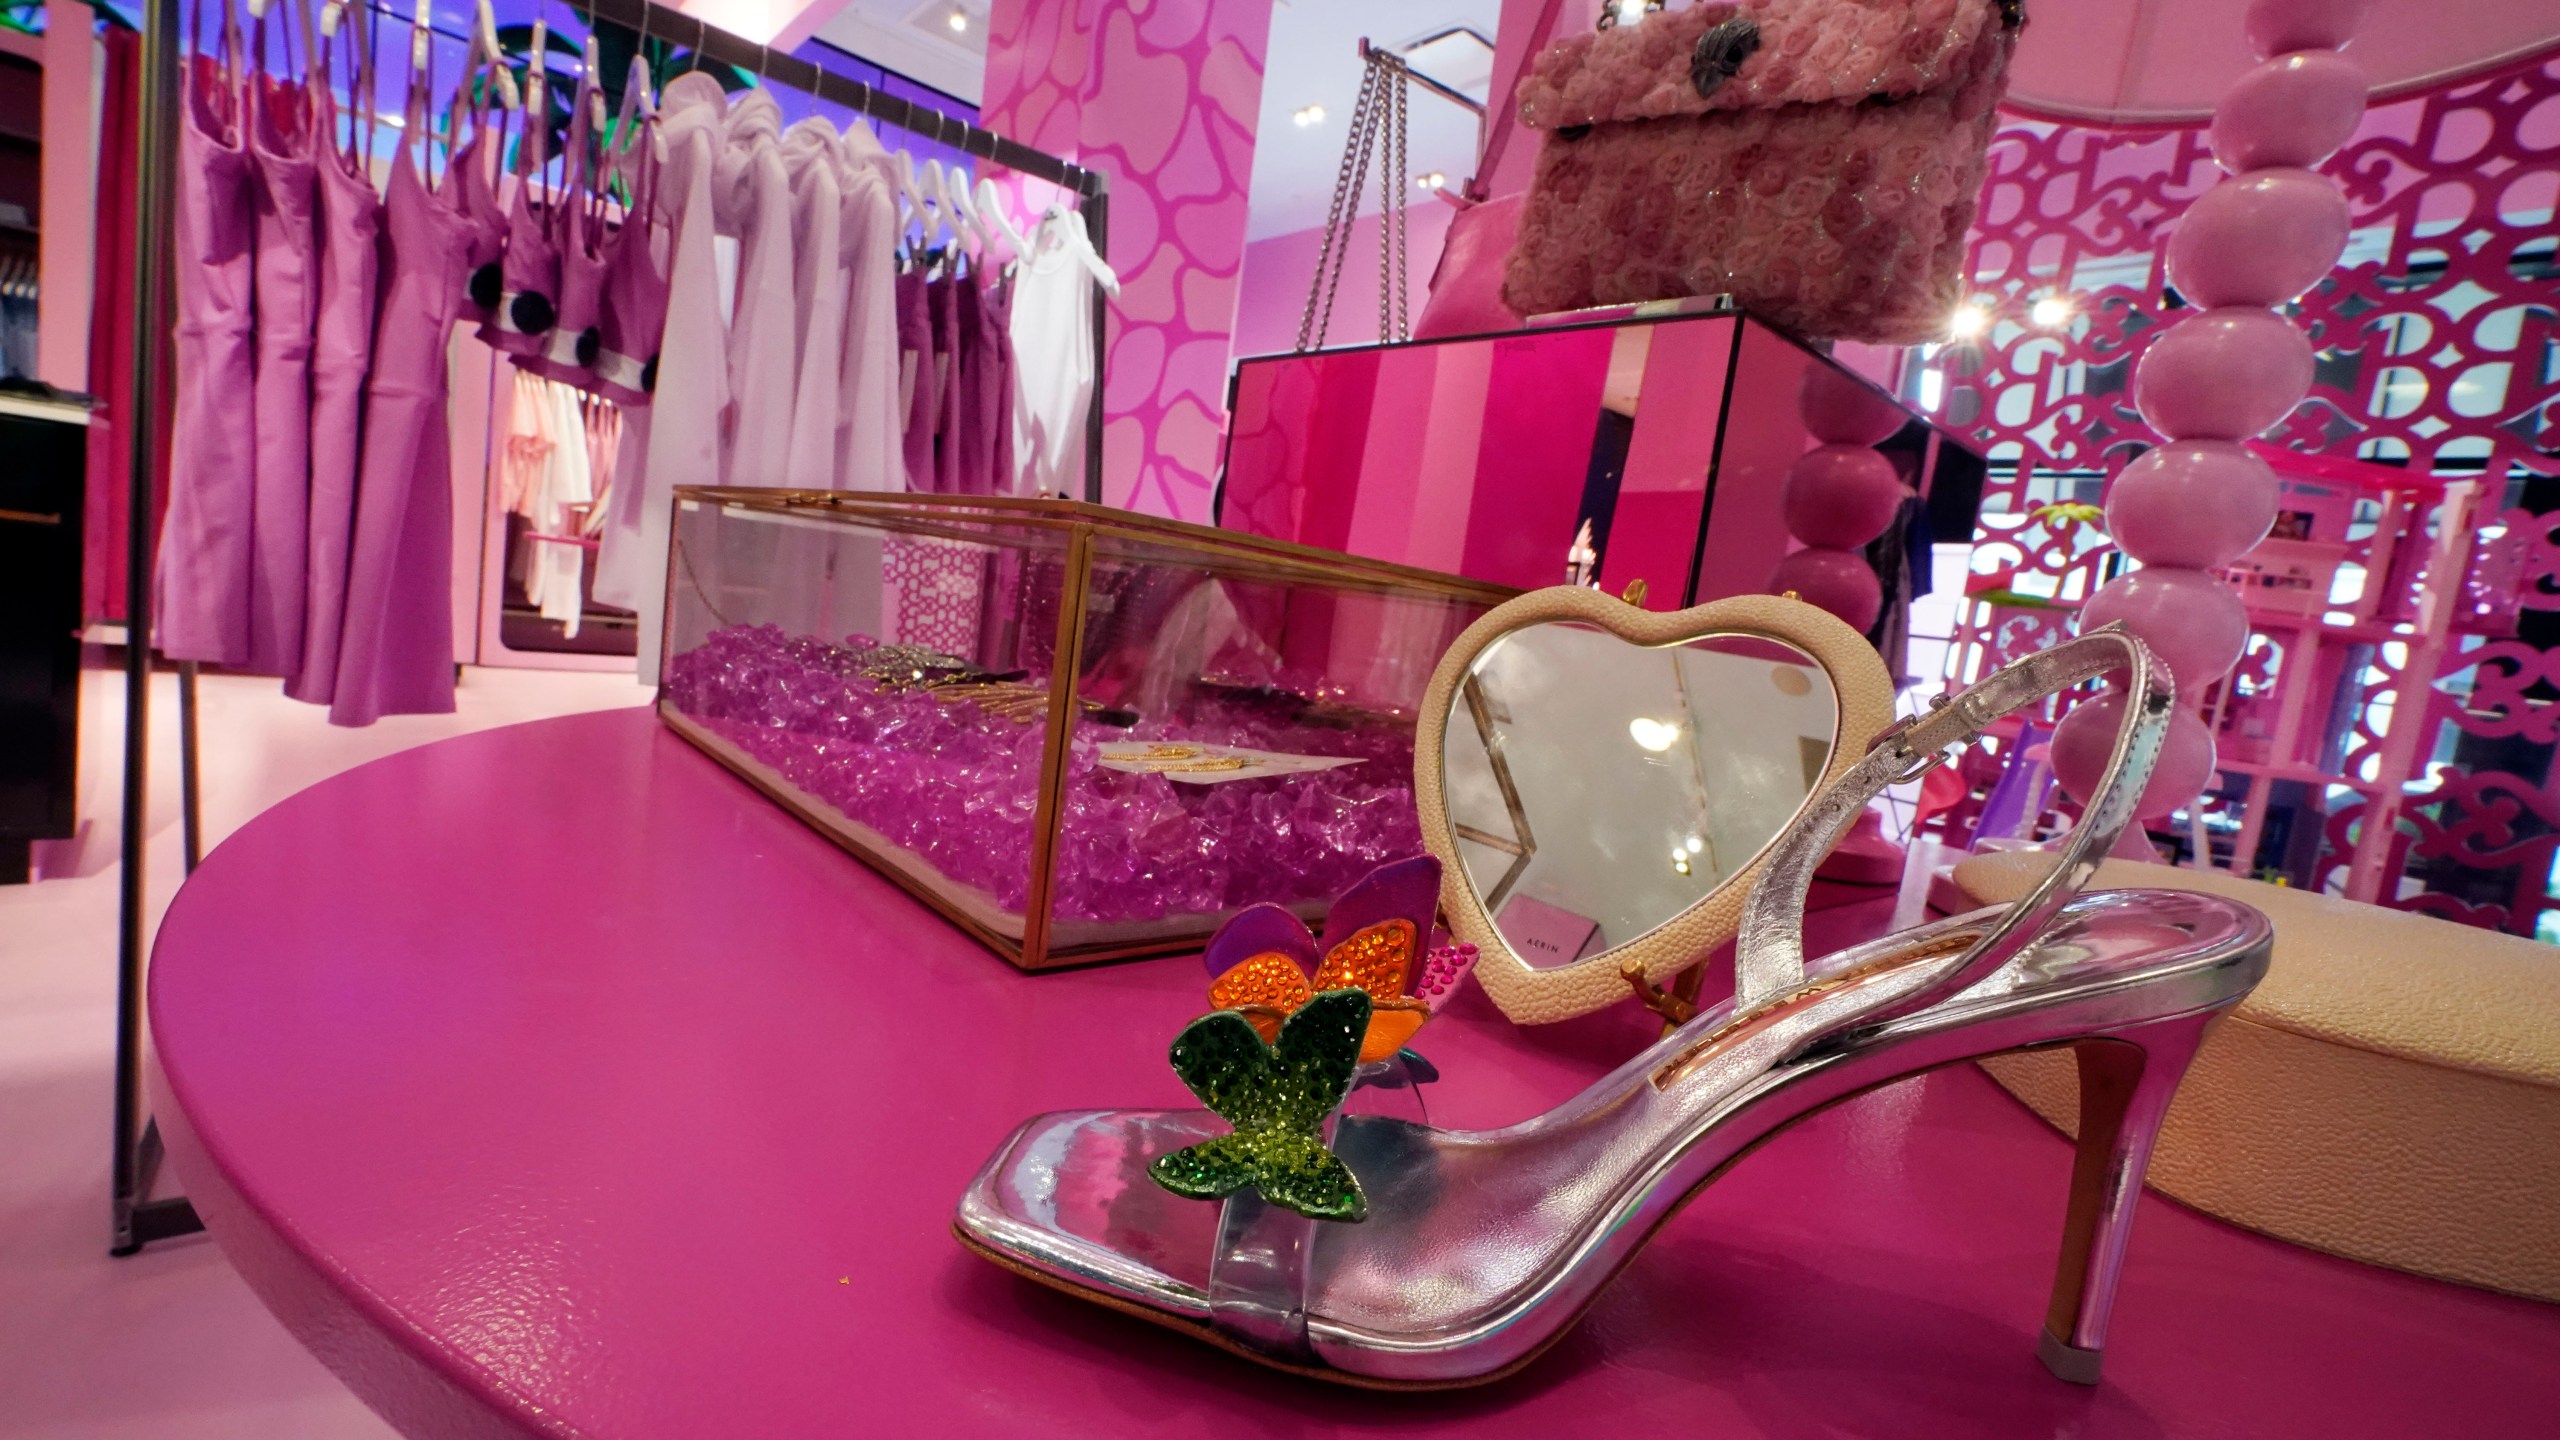 FILE - Barbie-themed merchandise is displayed in a special section at Bloomingdale's, in New York, Thursday, July 20, 2023. According to the fashion company LYST, the "Barbiecore" trend began after pictures of a pink-clad Margot Robbie surfaced online in June 2022, a year before the actor's "Barbie" movie came out and toy maker Mattel launched its own marketing blitz to promote the color. (AP Photo/Richard Drew, File)